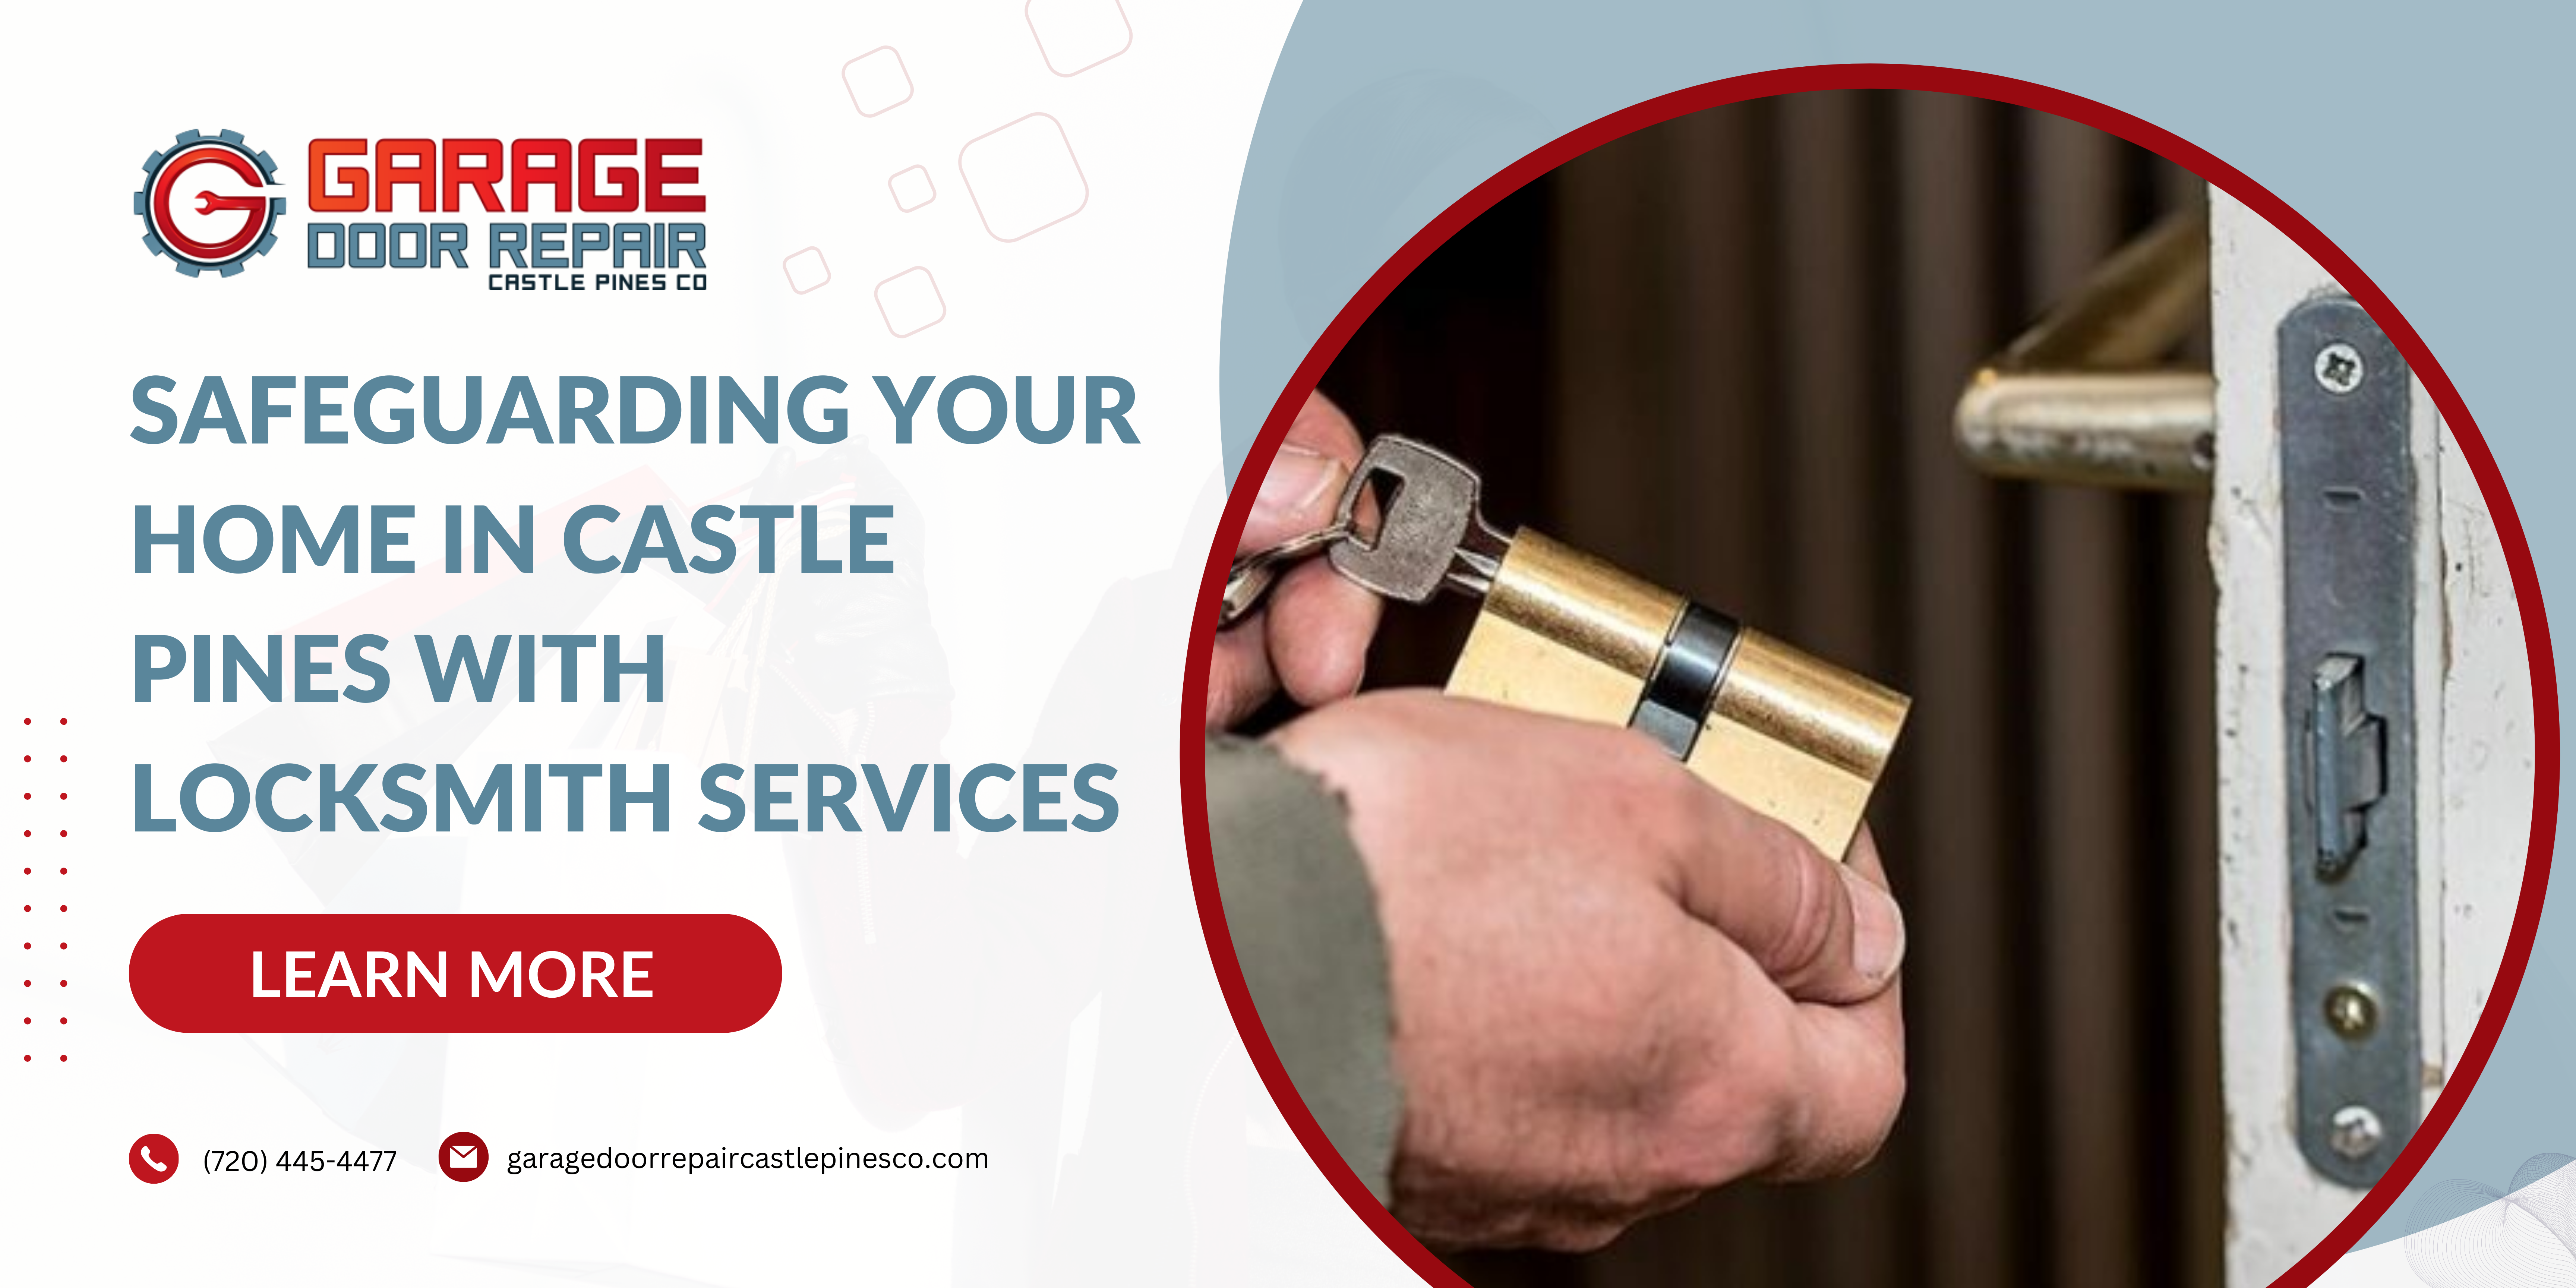 Safeguarding Your Home in Castle Pines With Locksmith Services